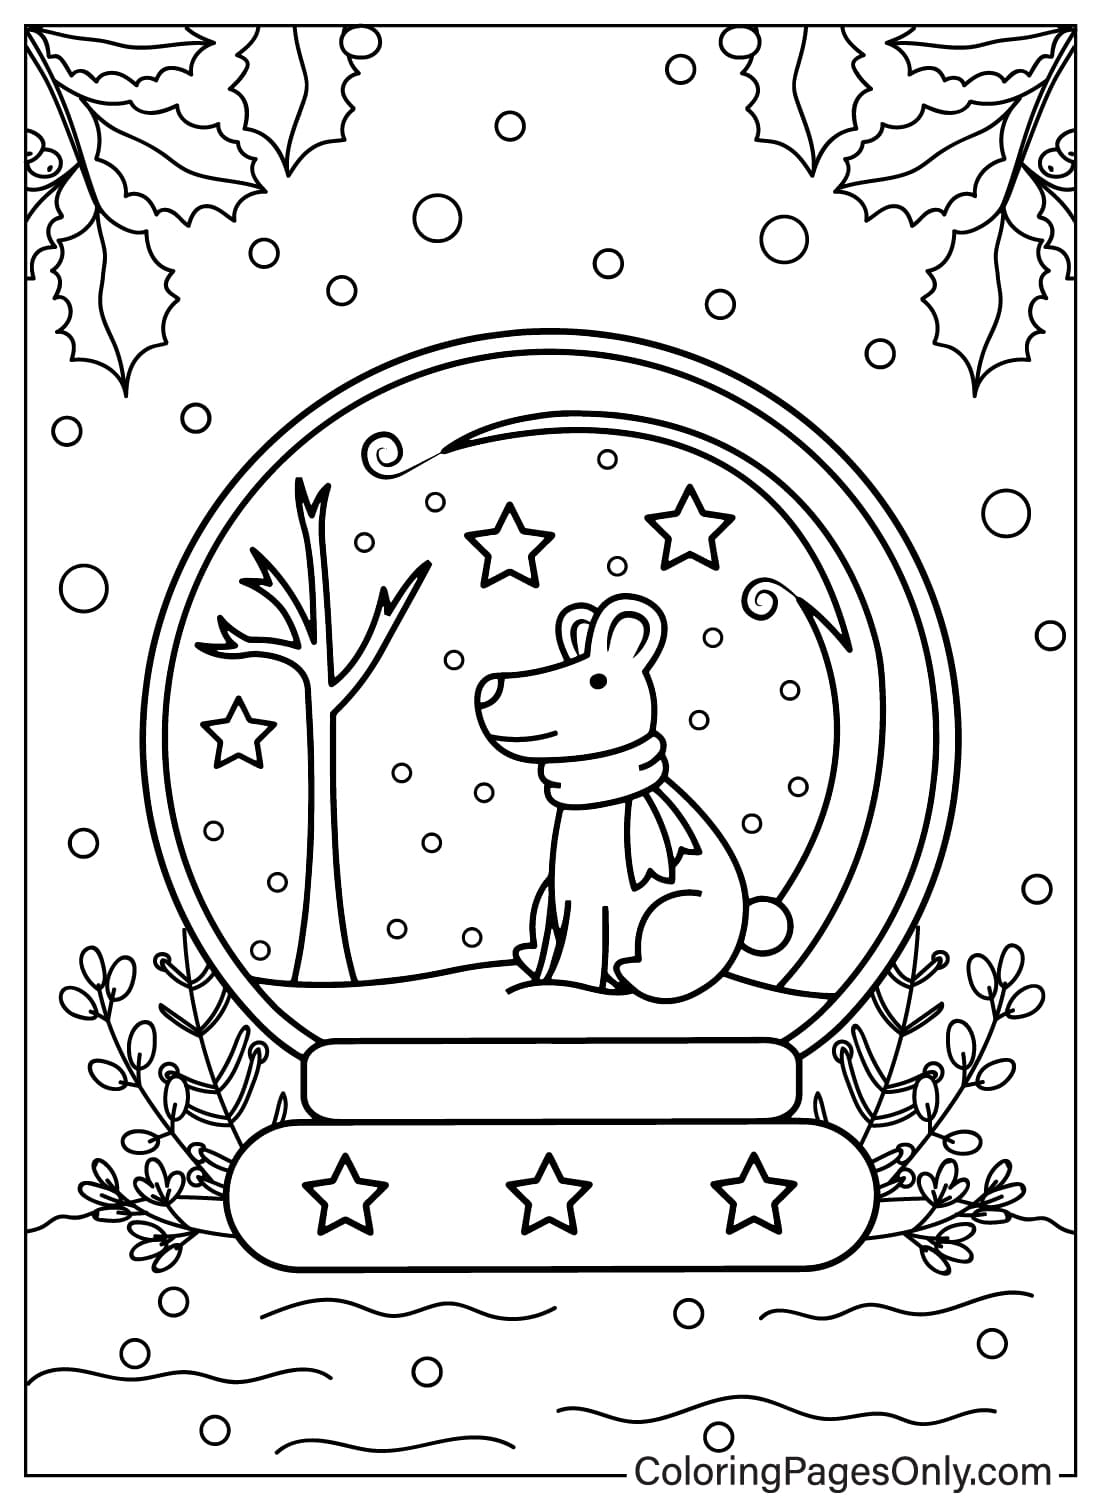 Snow Globe Color Page - Free Printable Coloring Pages